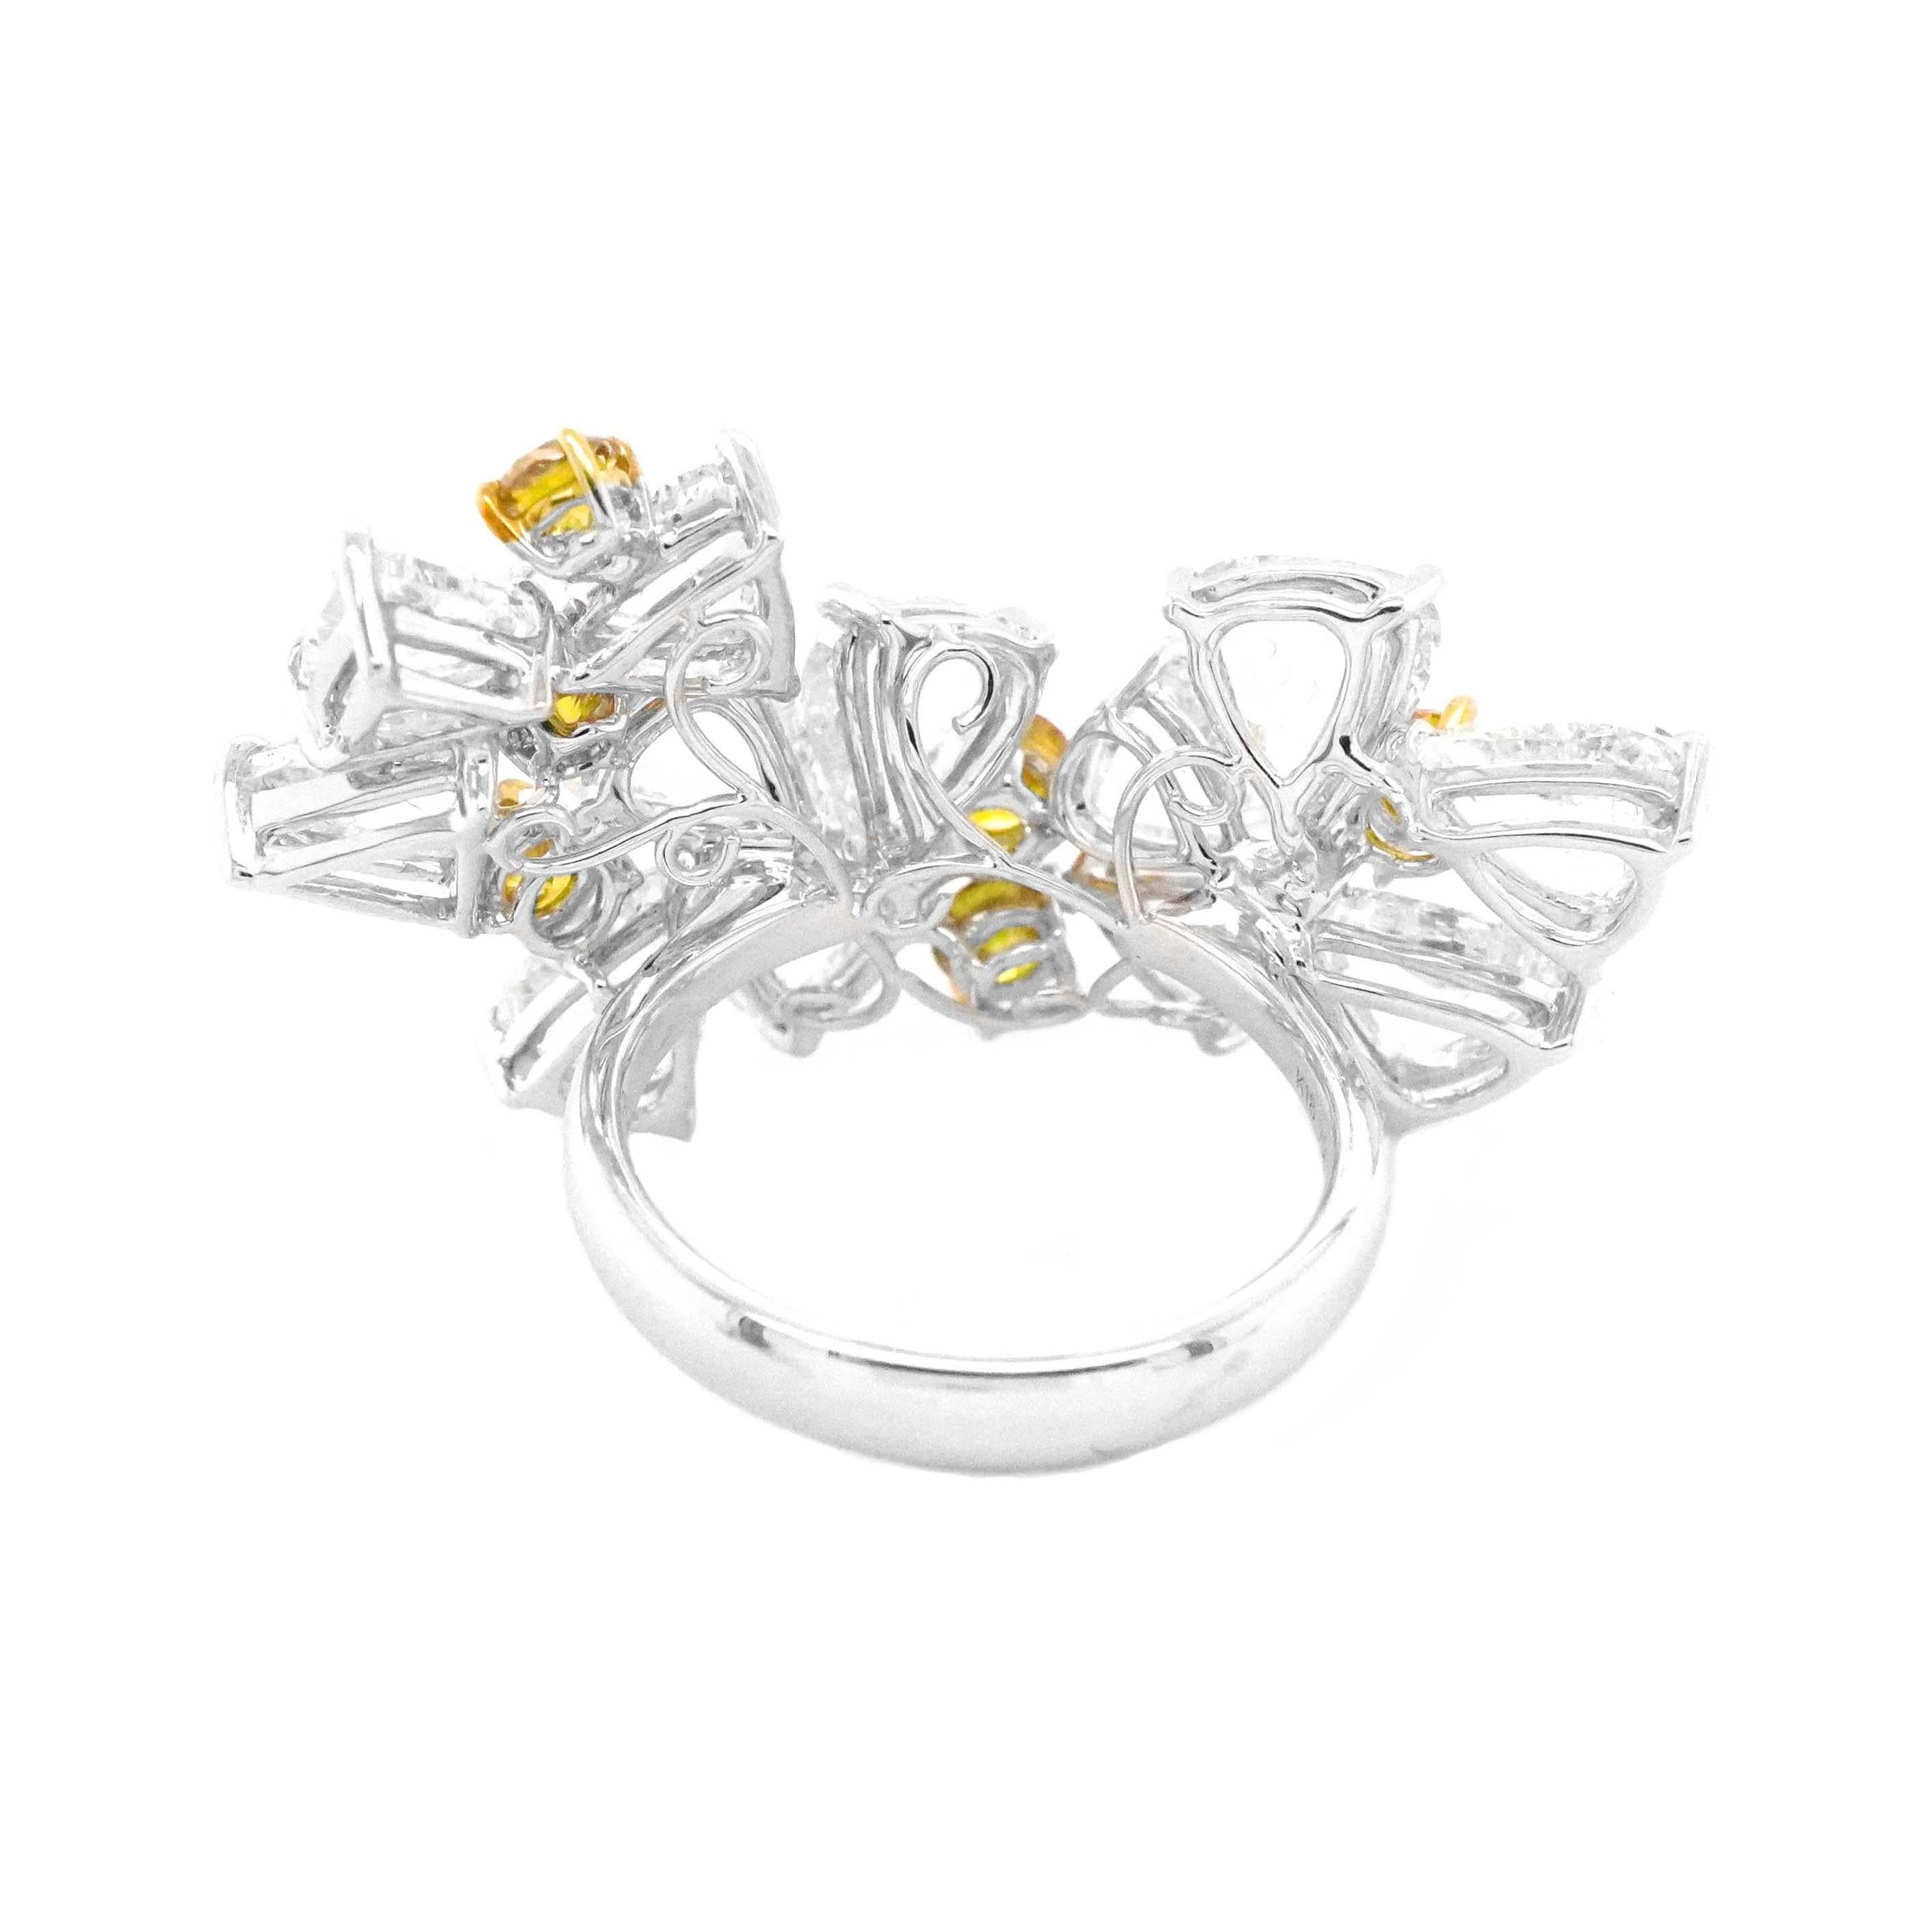 Women's 8.79 Carat D Color White Diamond and 1.23 Carat Vivid Yellow Collectors Ring For Sale